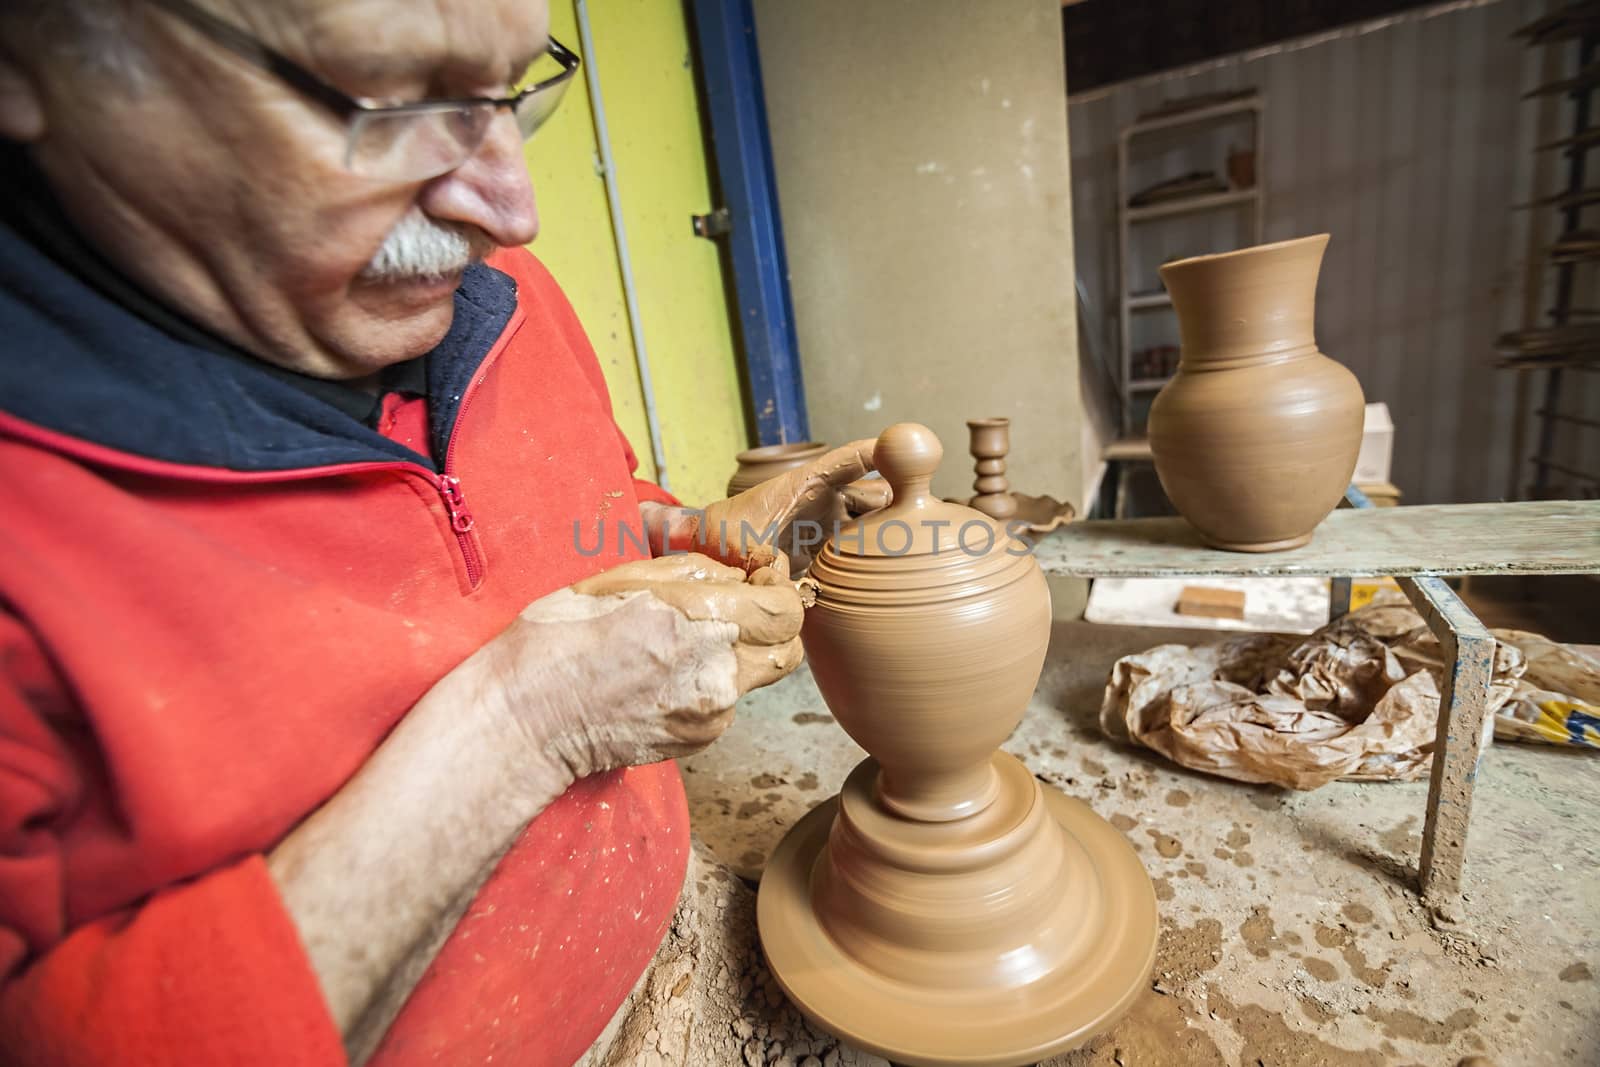 Potter making a jug of mud, clay pottery ceramics typical of Bailen, Jaen province, Andalucia, Spain